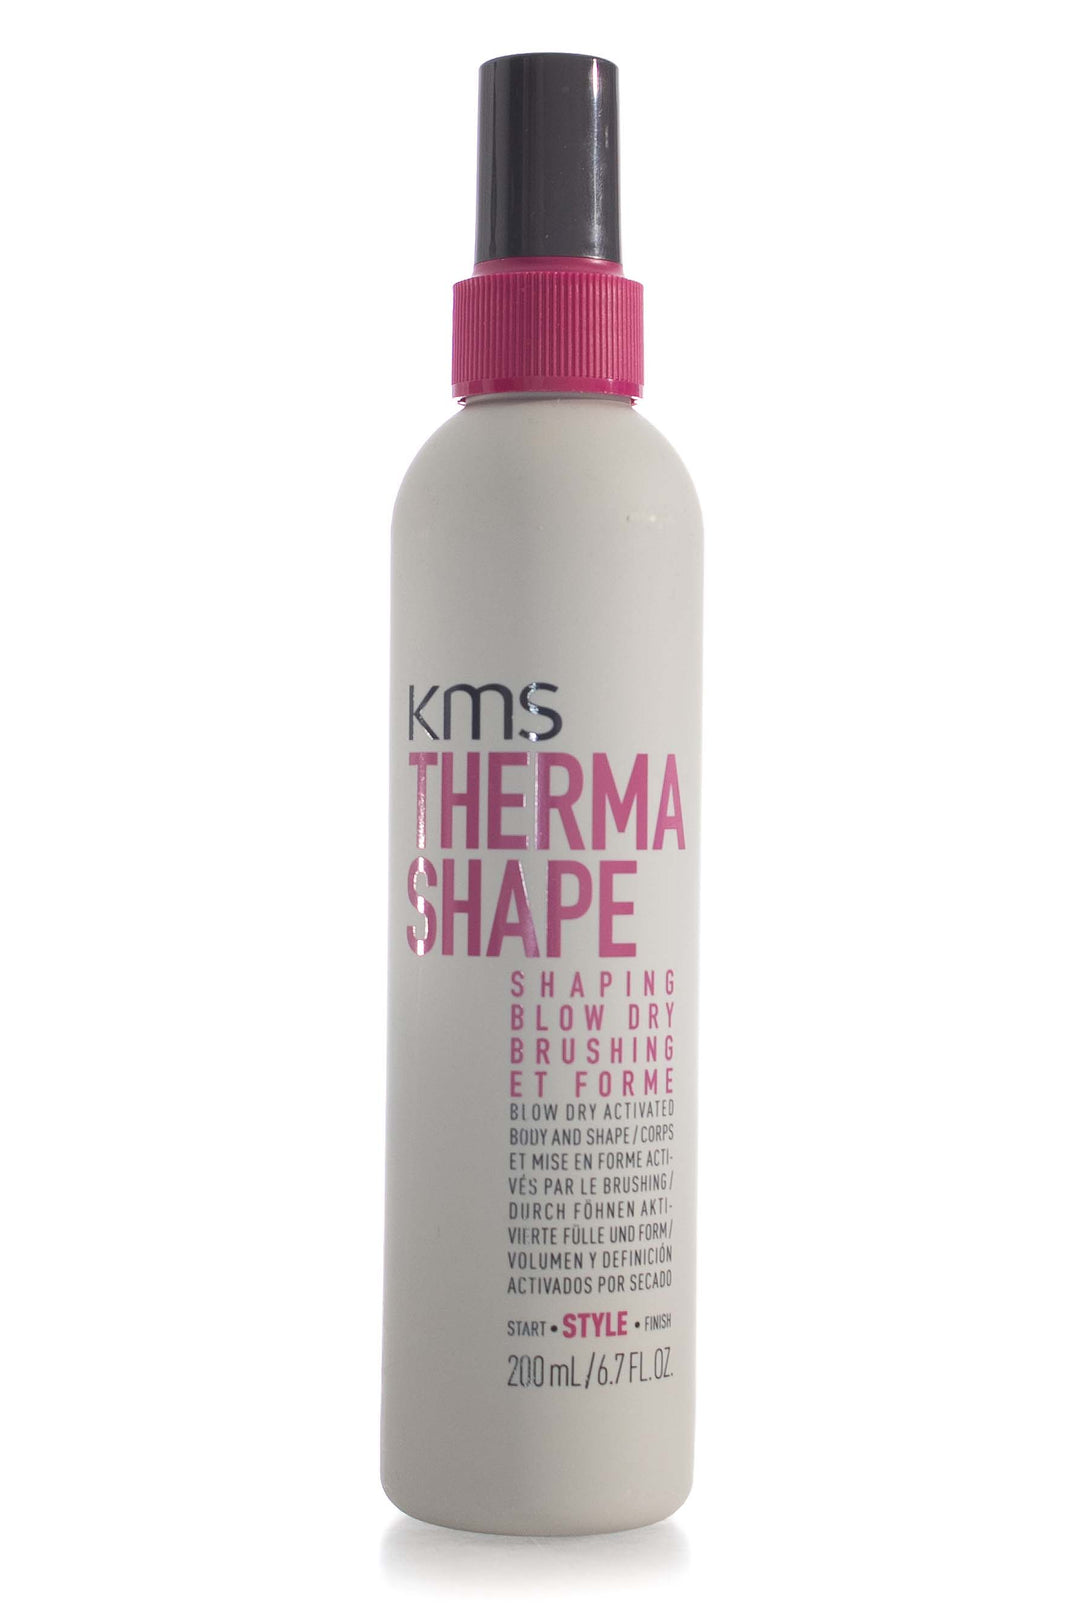 Product Image: KMS Thermashape Shaping Blow Dry - 200ml